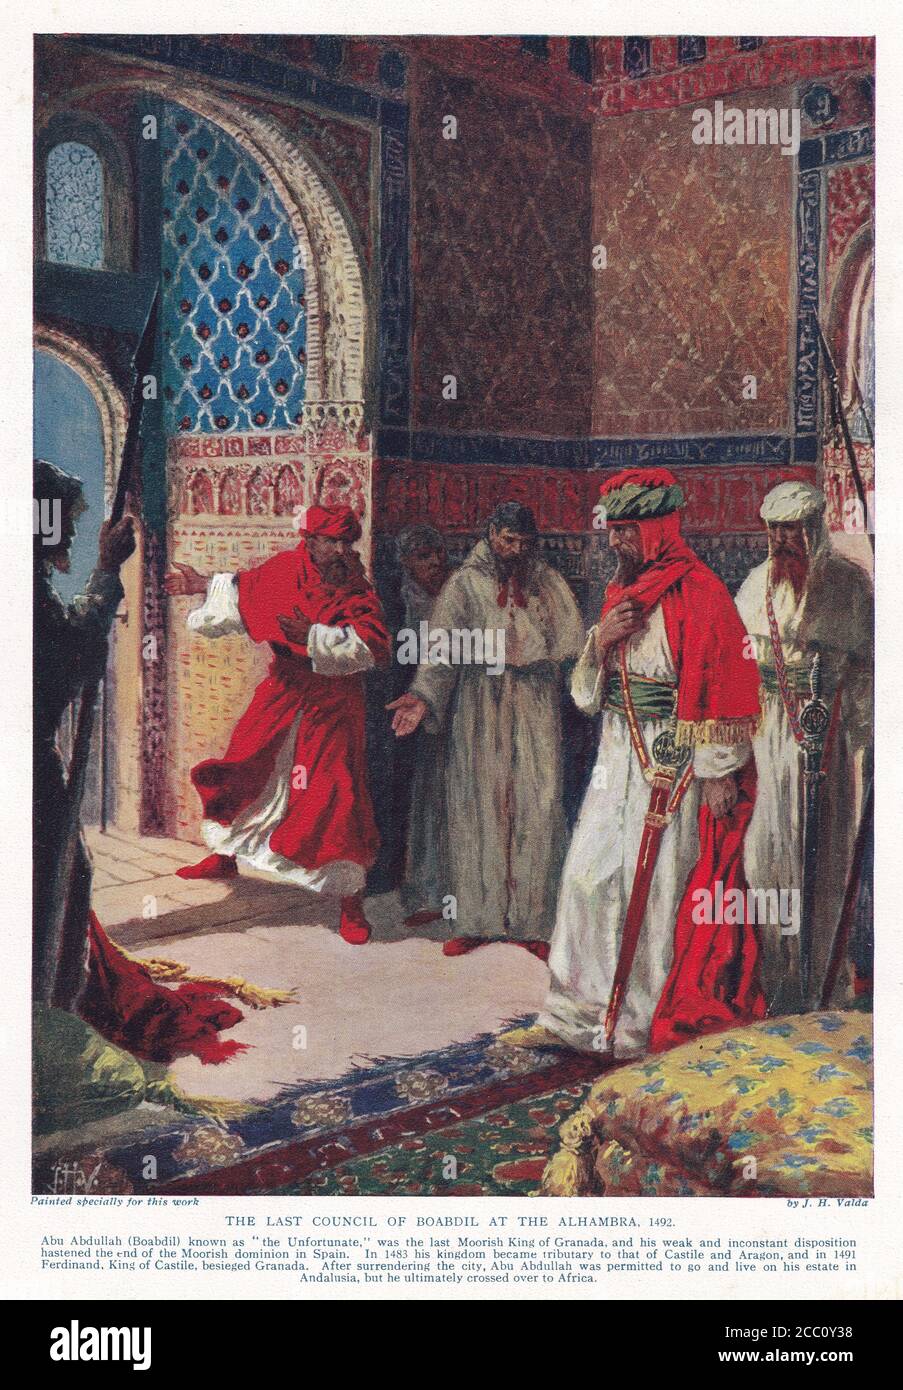 The Last Council of Boabdil at the Alhambra 1492 - Painting by J. H. Valda. Stock Photo